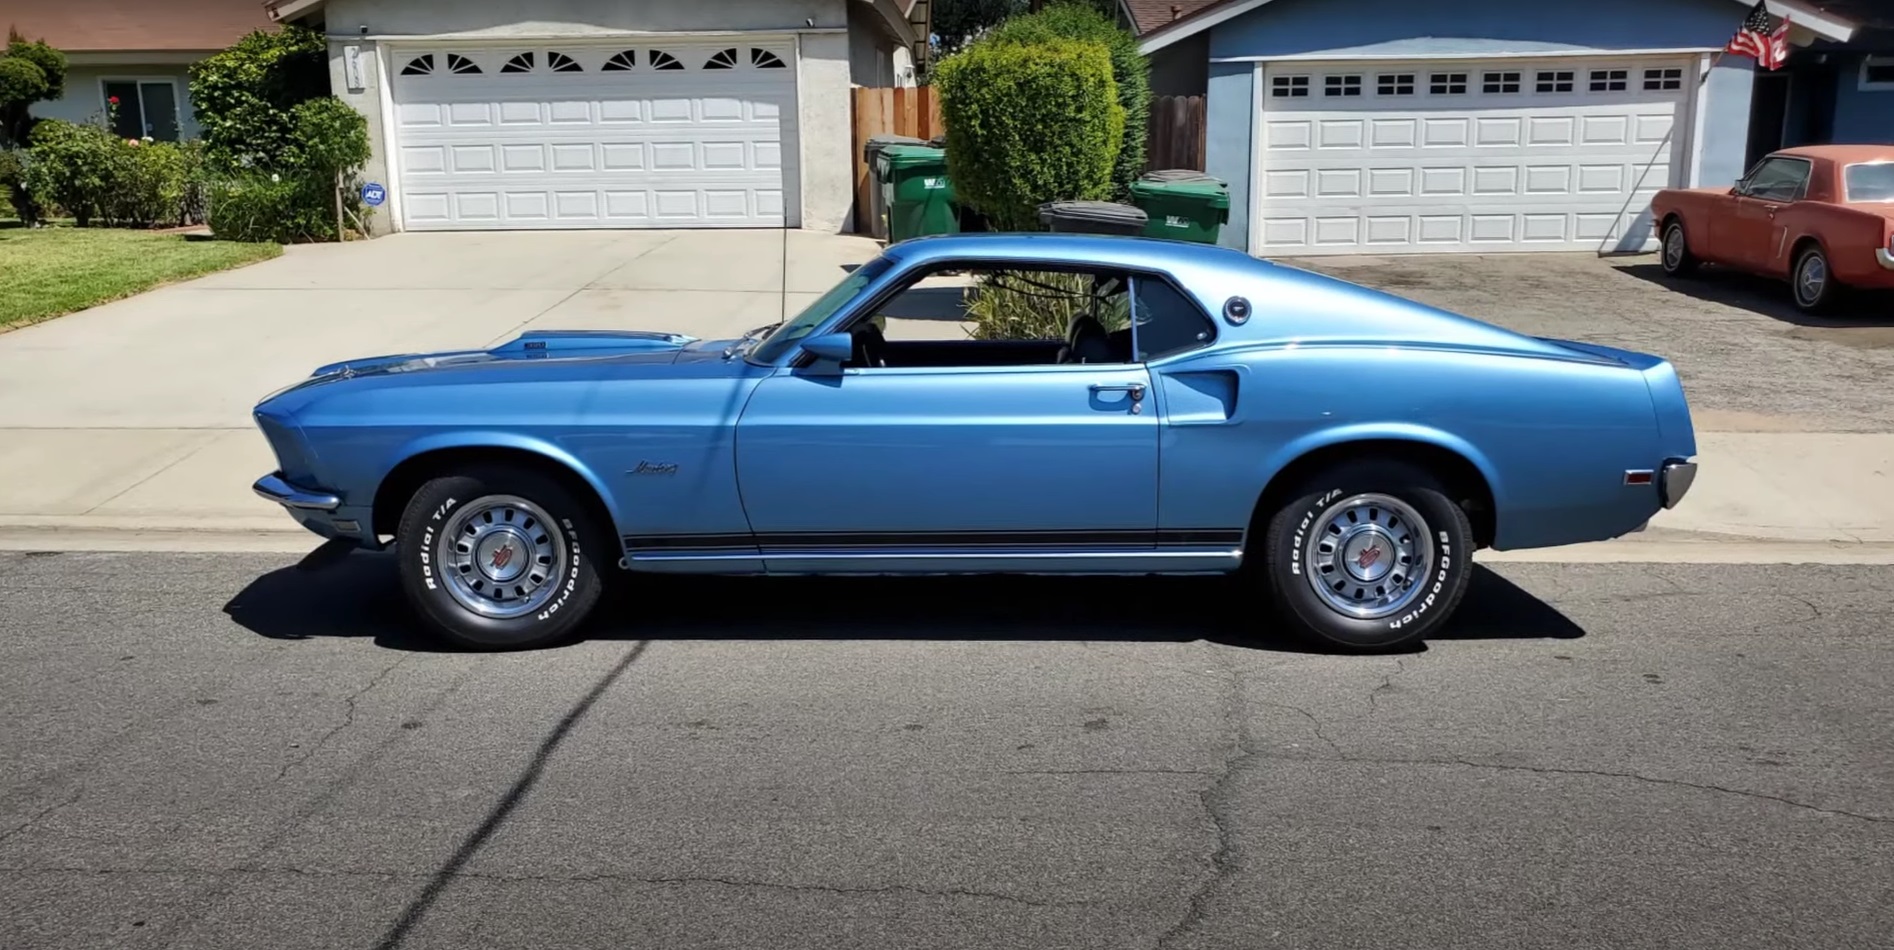 An Owner's Take On The 1969 Ford Mustang GT